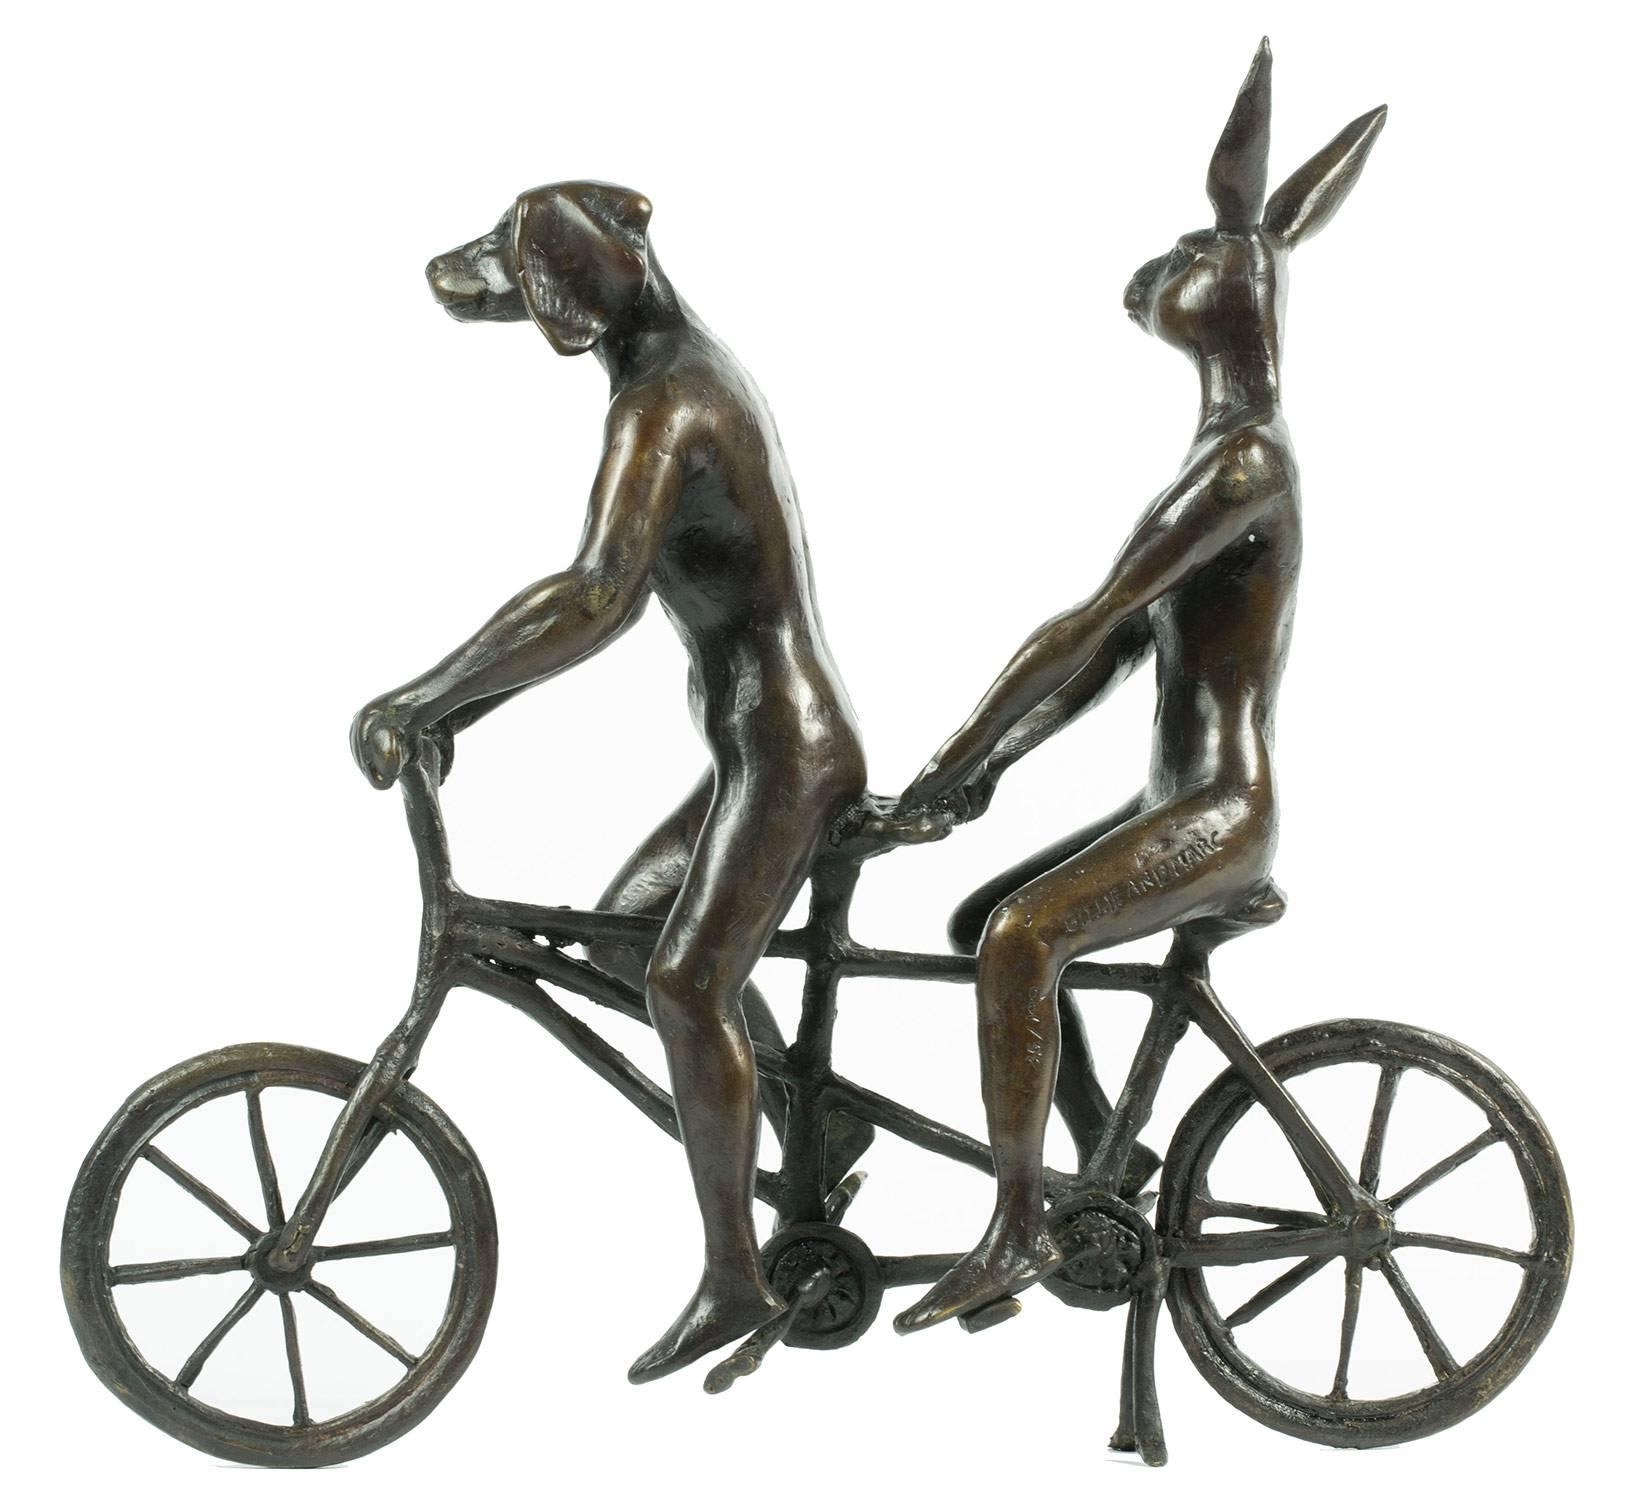 Gillie and Marc Schattner Figurative Sculpture - They Loved Riding Together in Paris